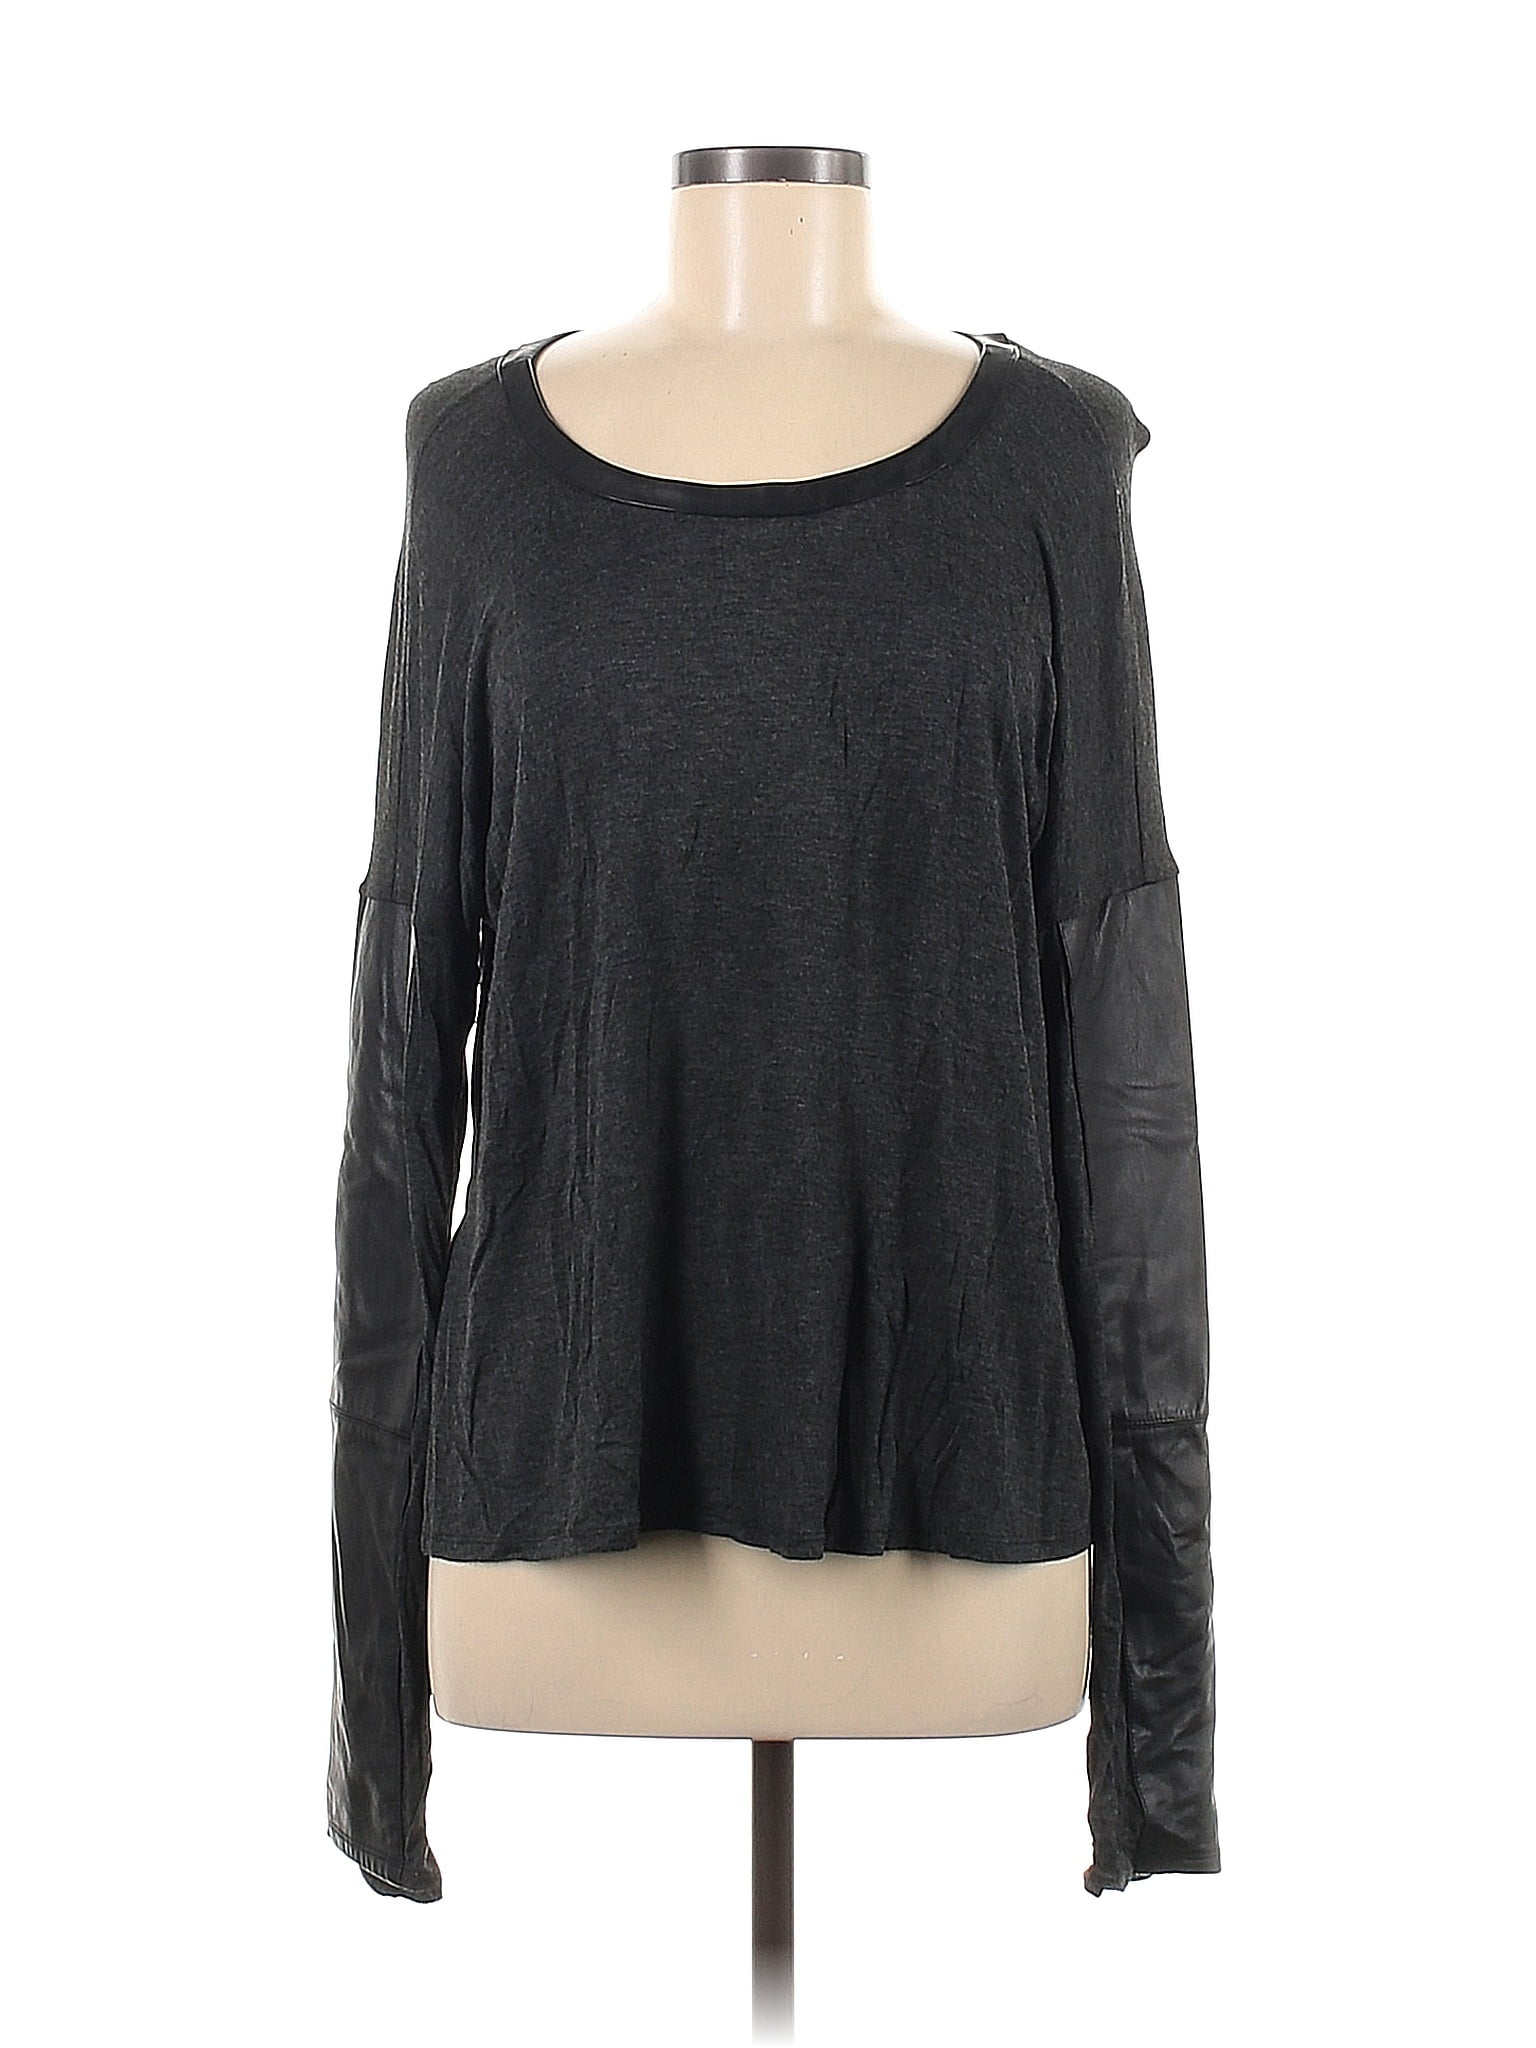 Feel the Piece Terre Jacobs Gray Black Long Sleeve Top Size Med - Lg ...